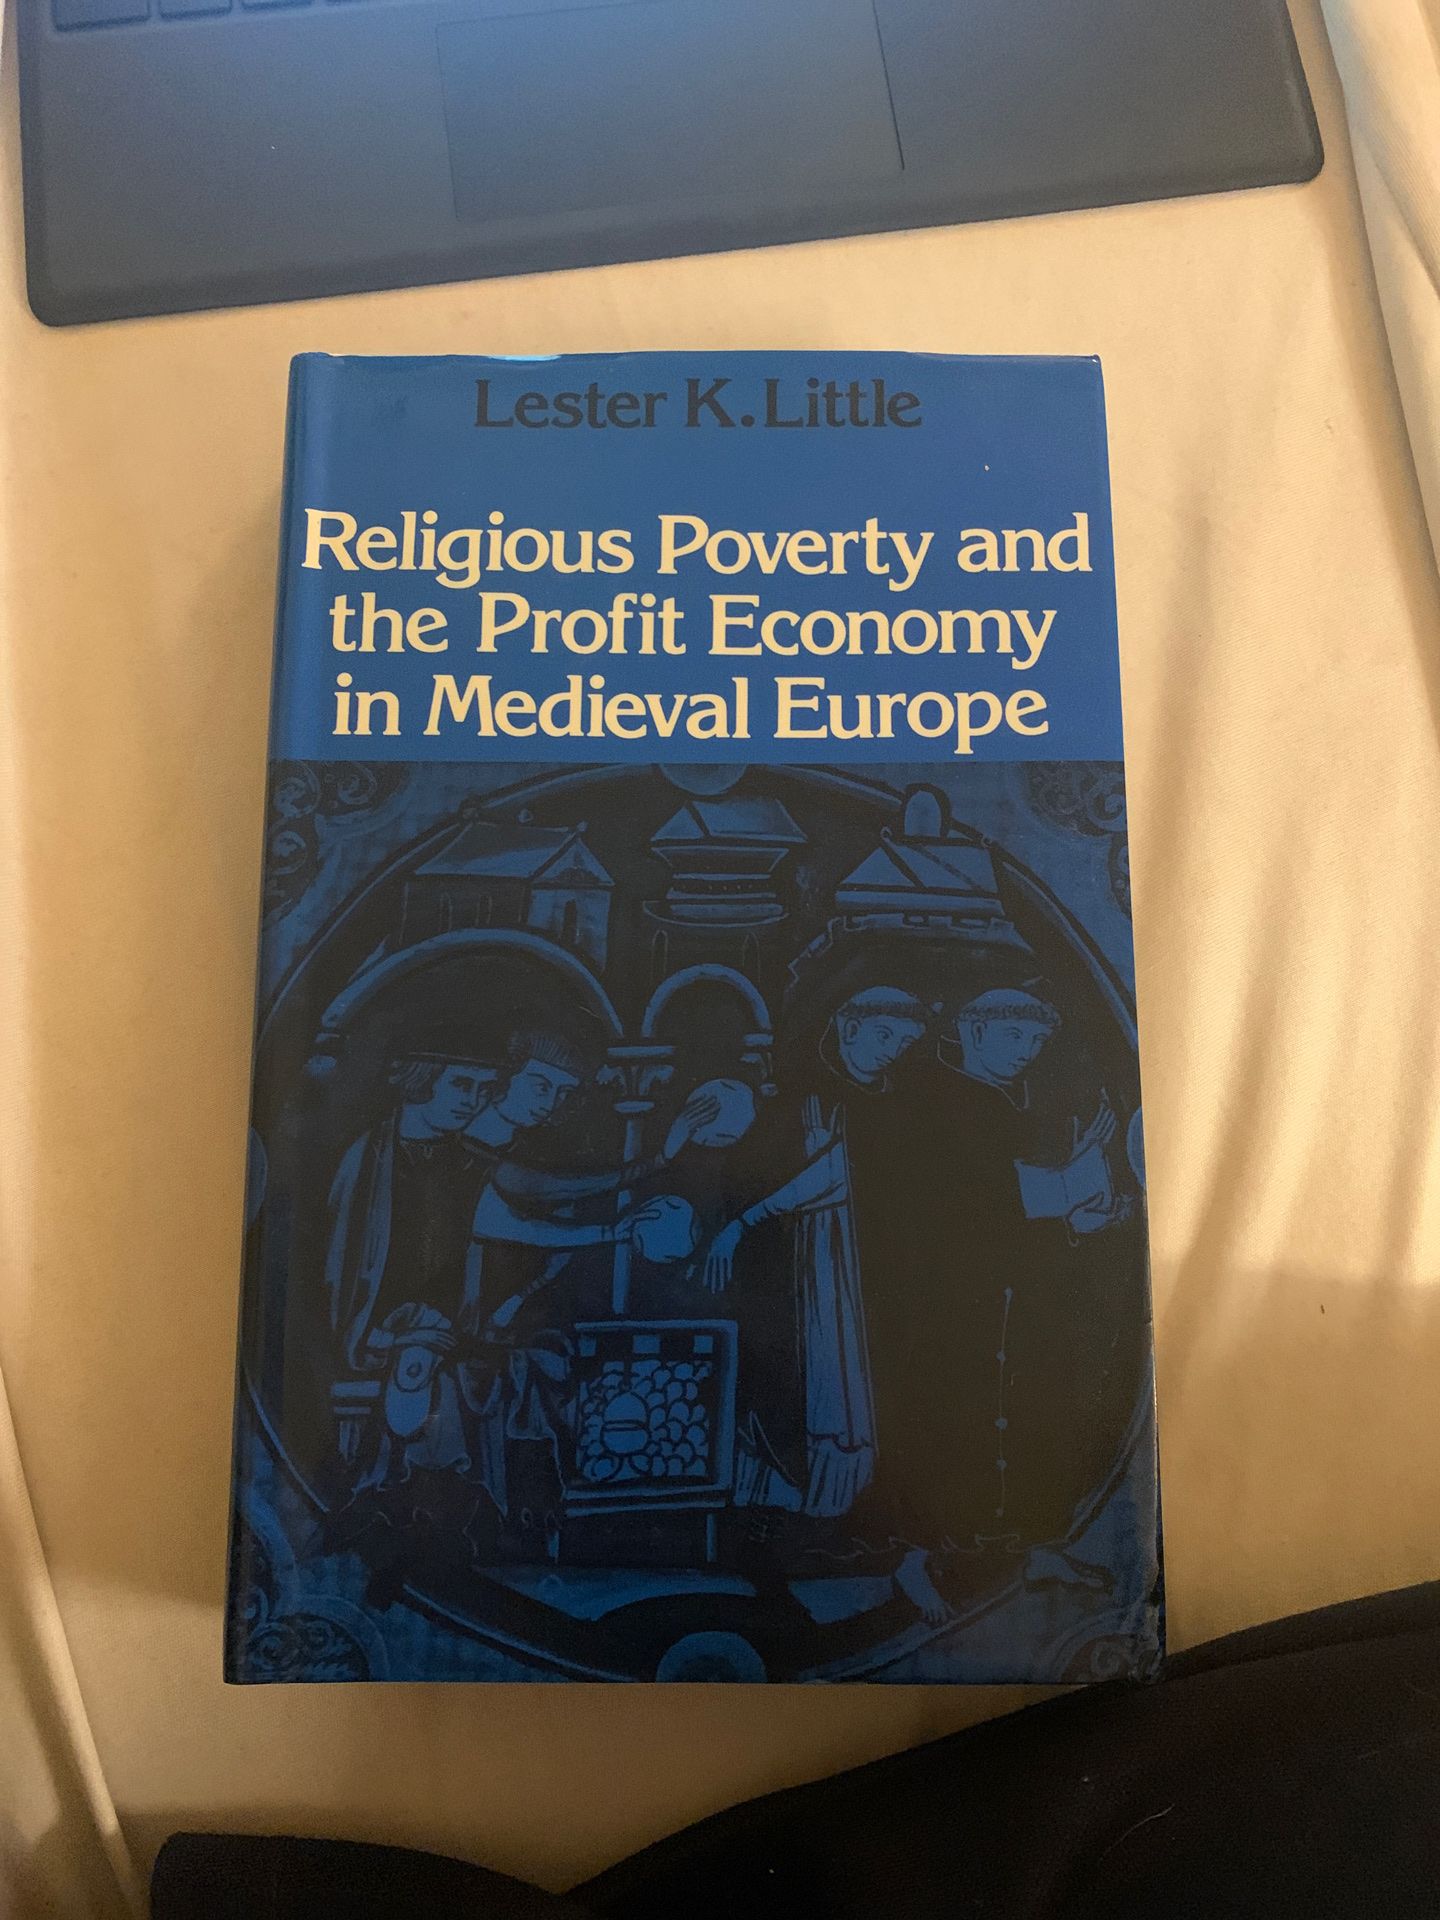 Religious Poverty and the Profit Economy in Medieval Europe by Lester K. Little